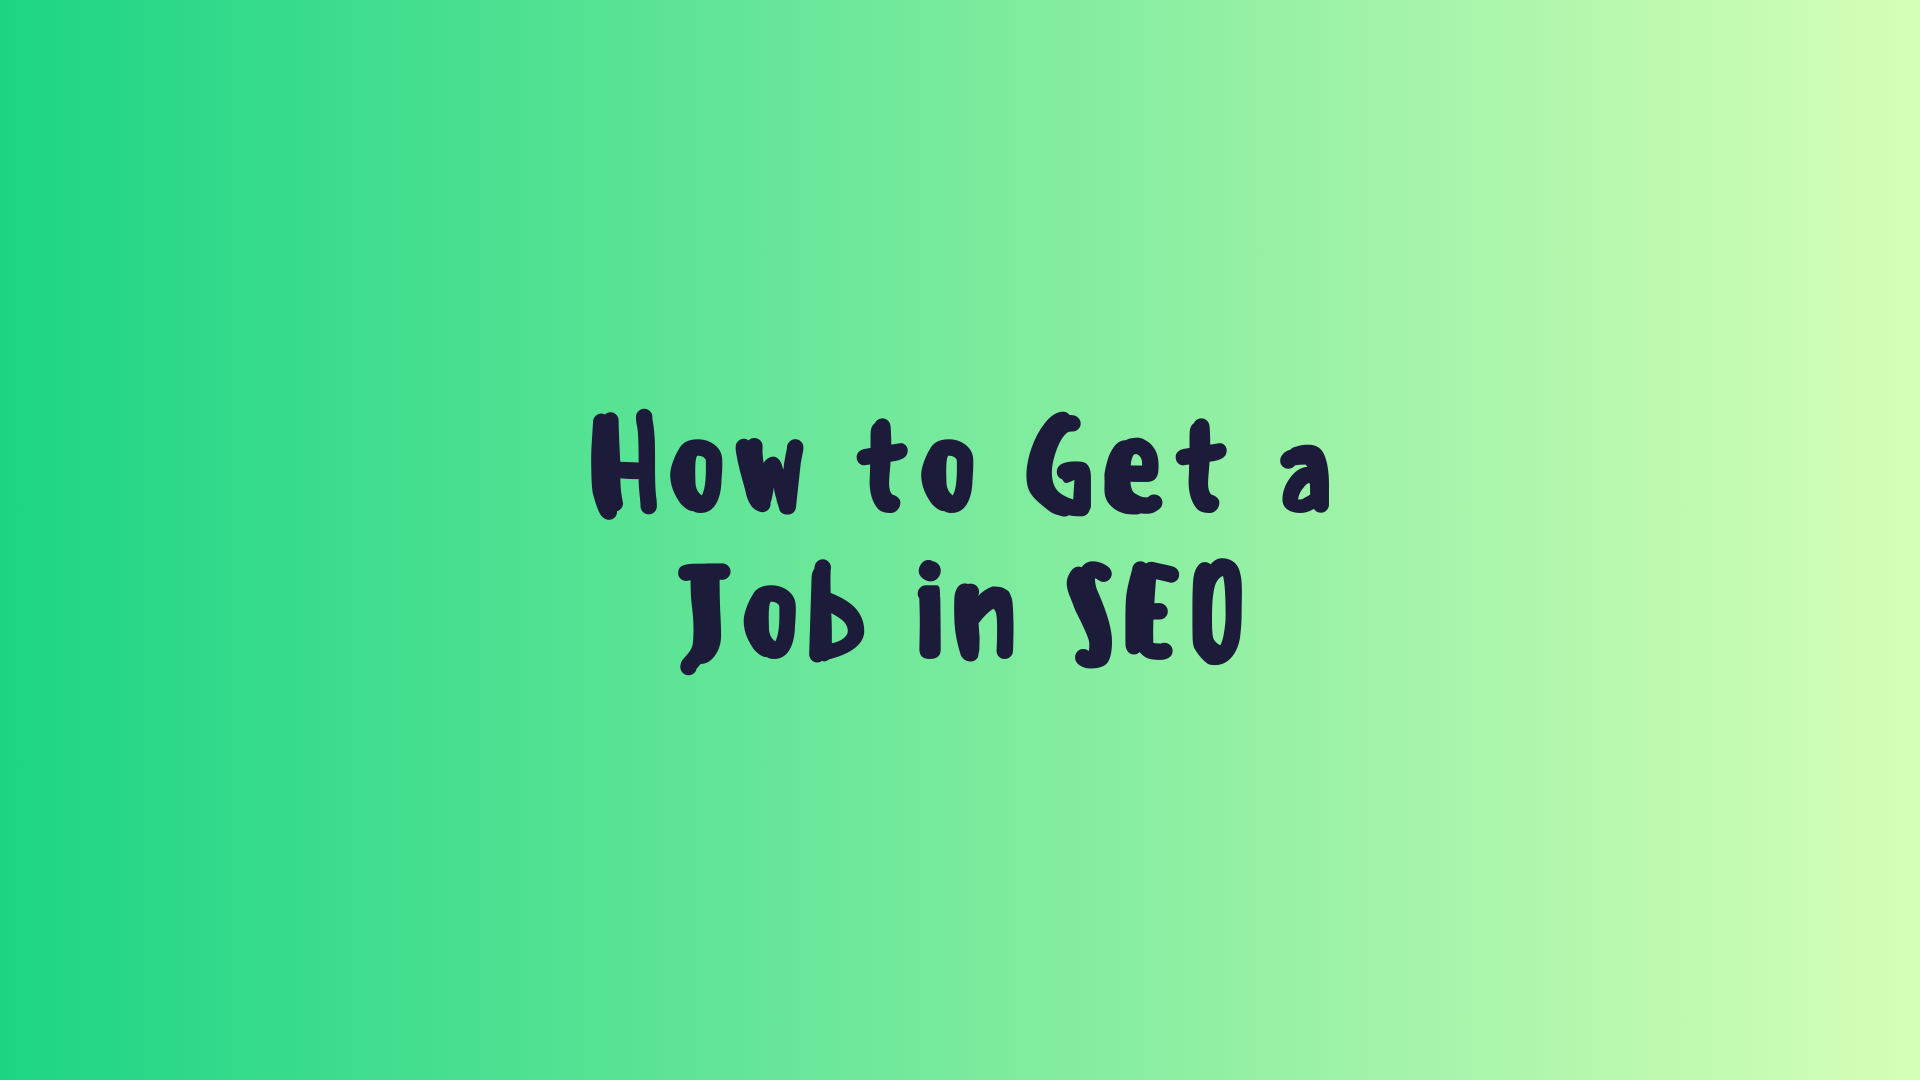 How to Get a Job in SEO